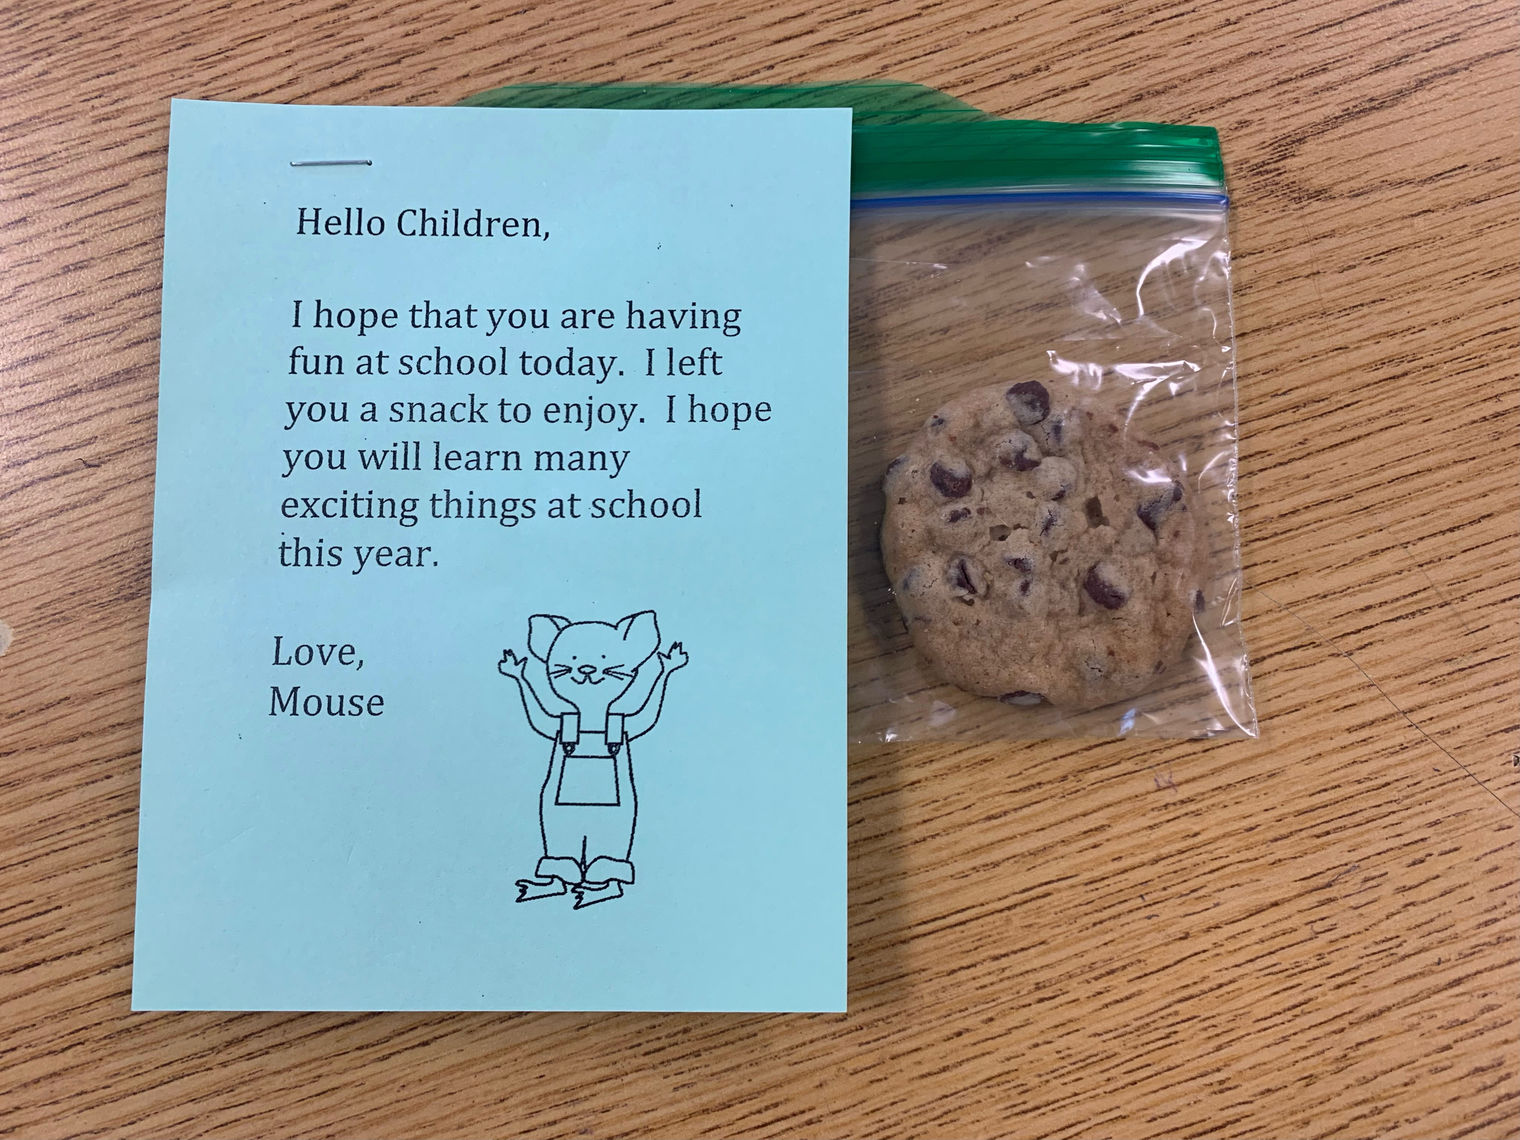 A note and a cookie from Mouse